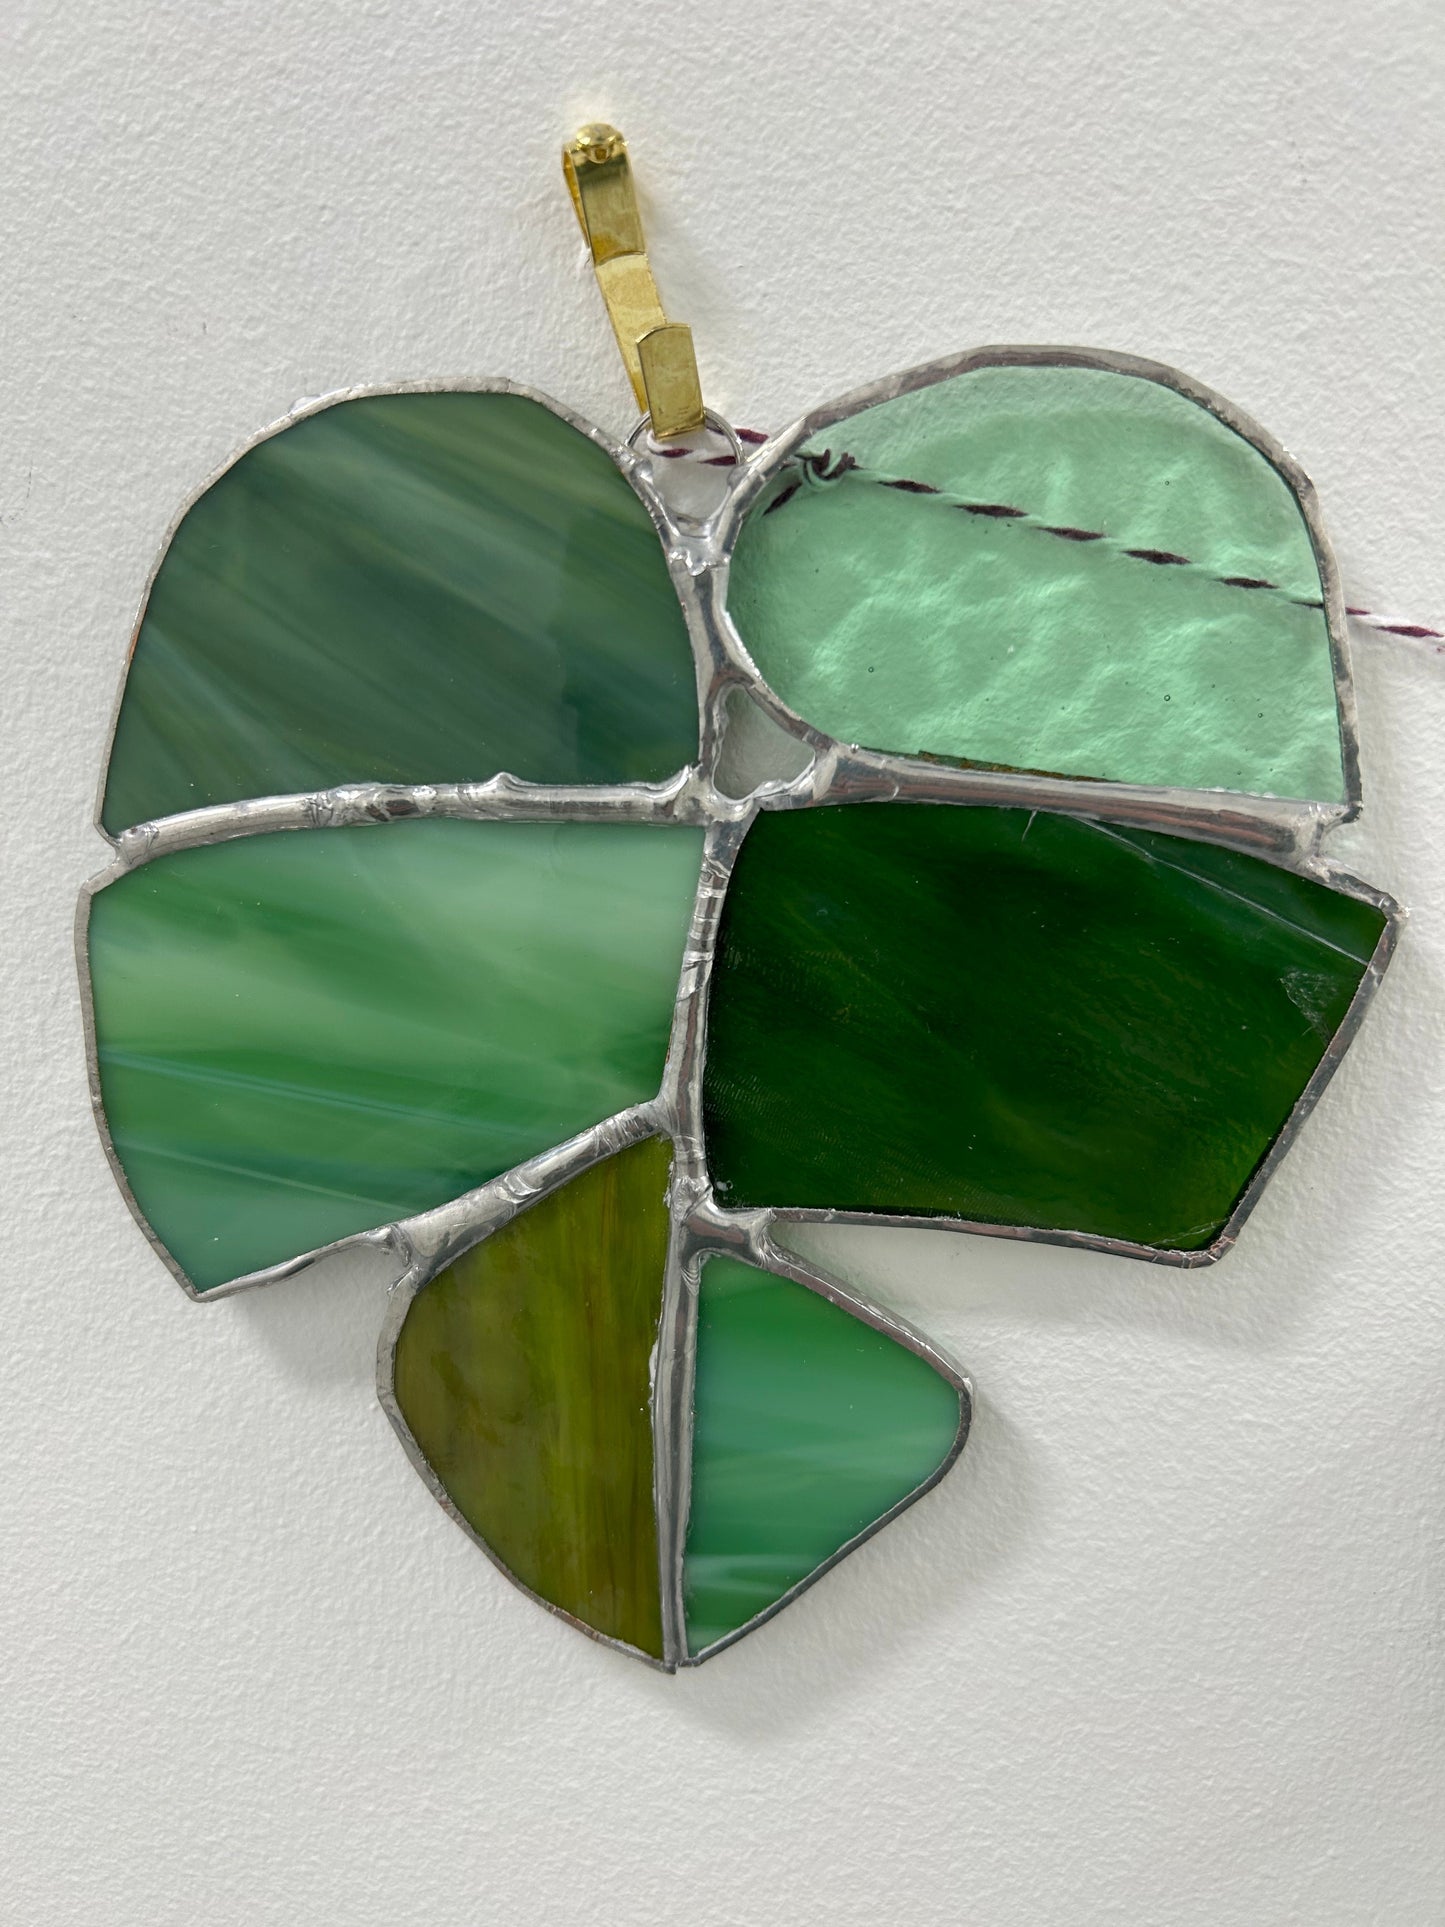 Beginner Stained Glass class, March 30, 11-2